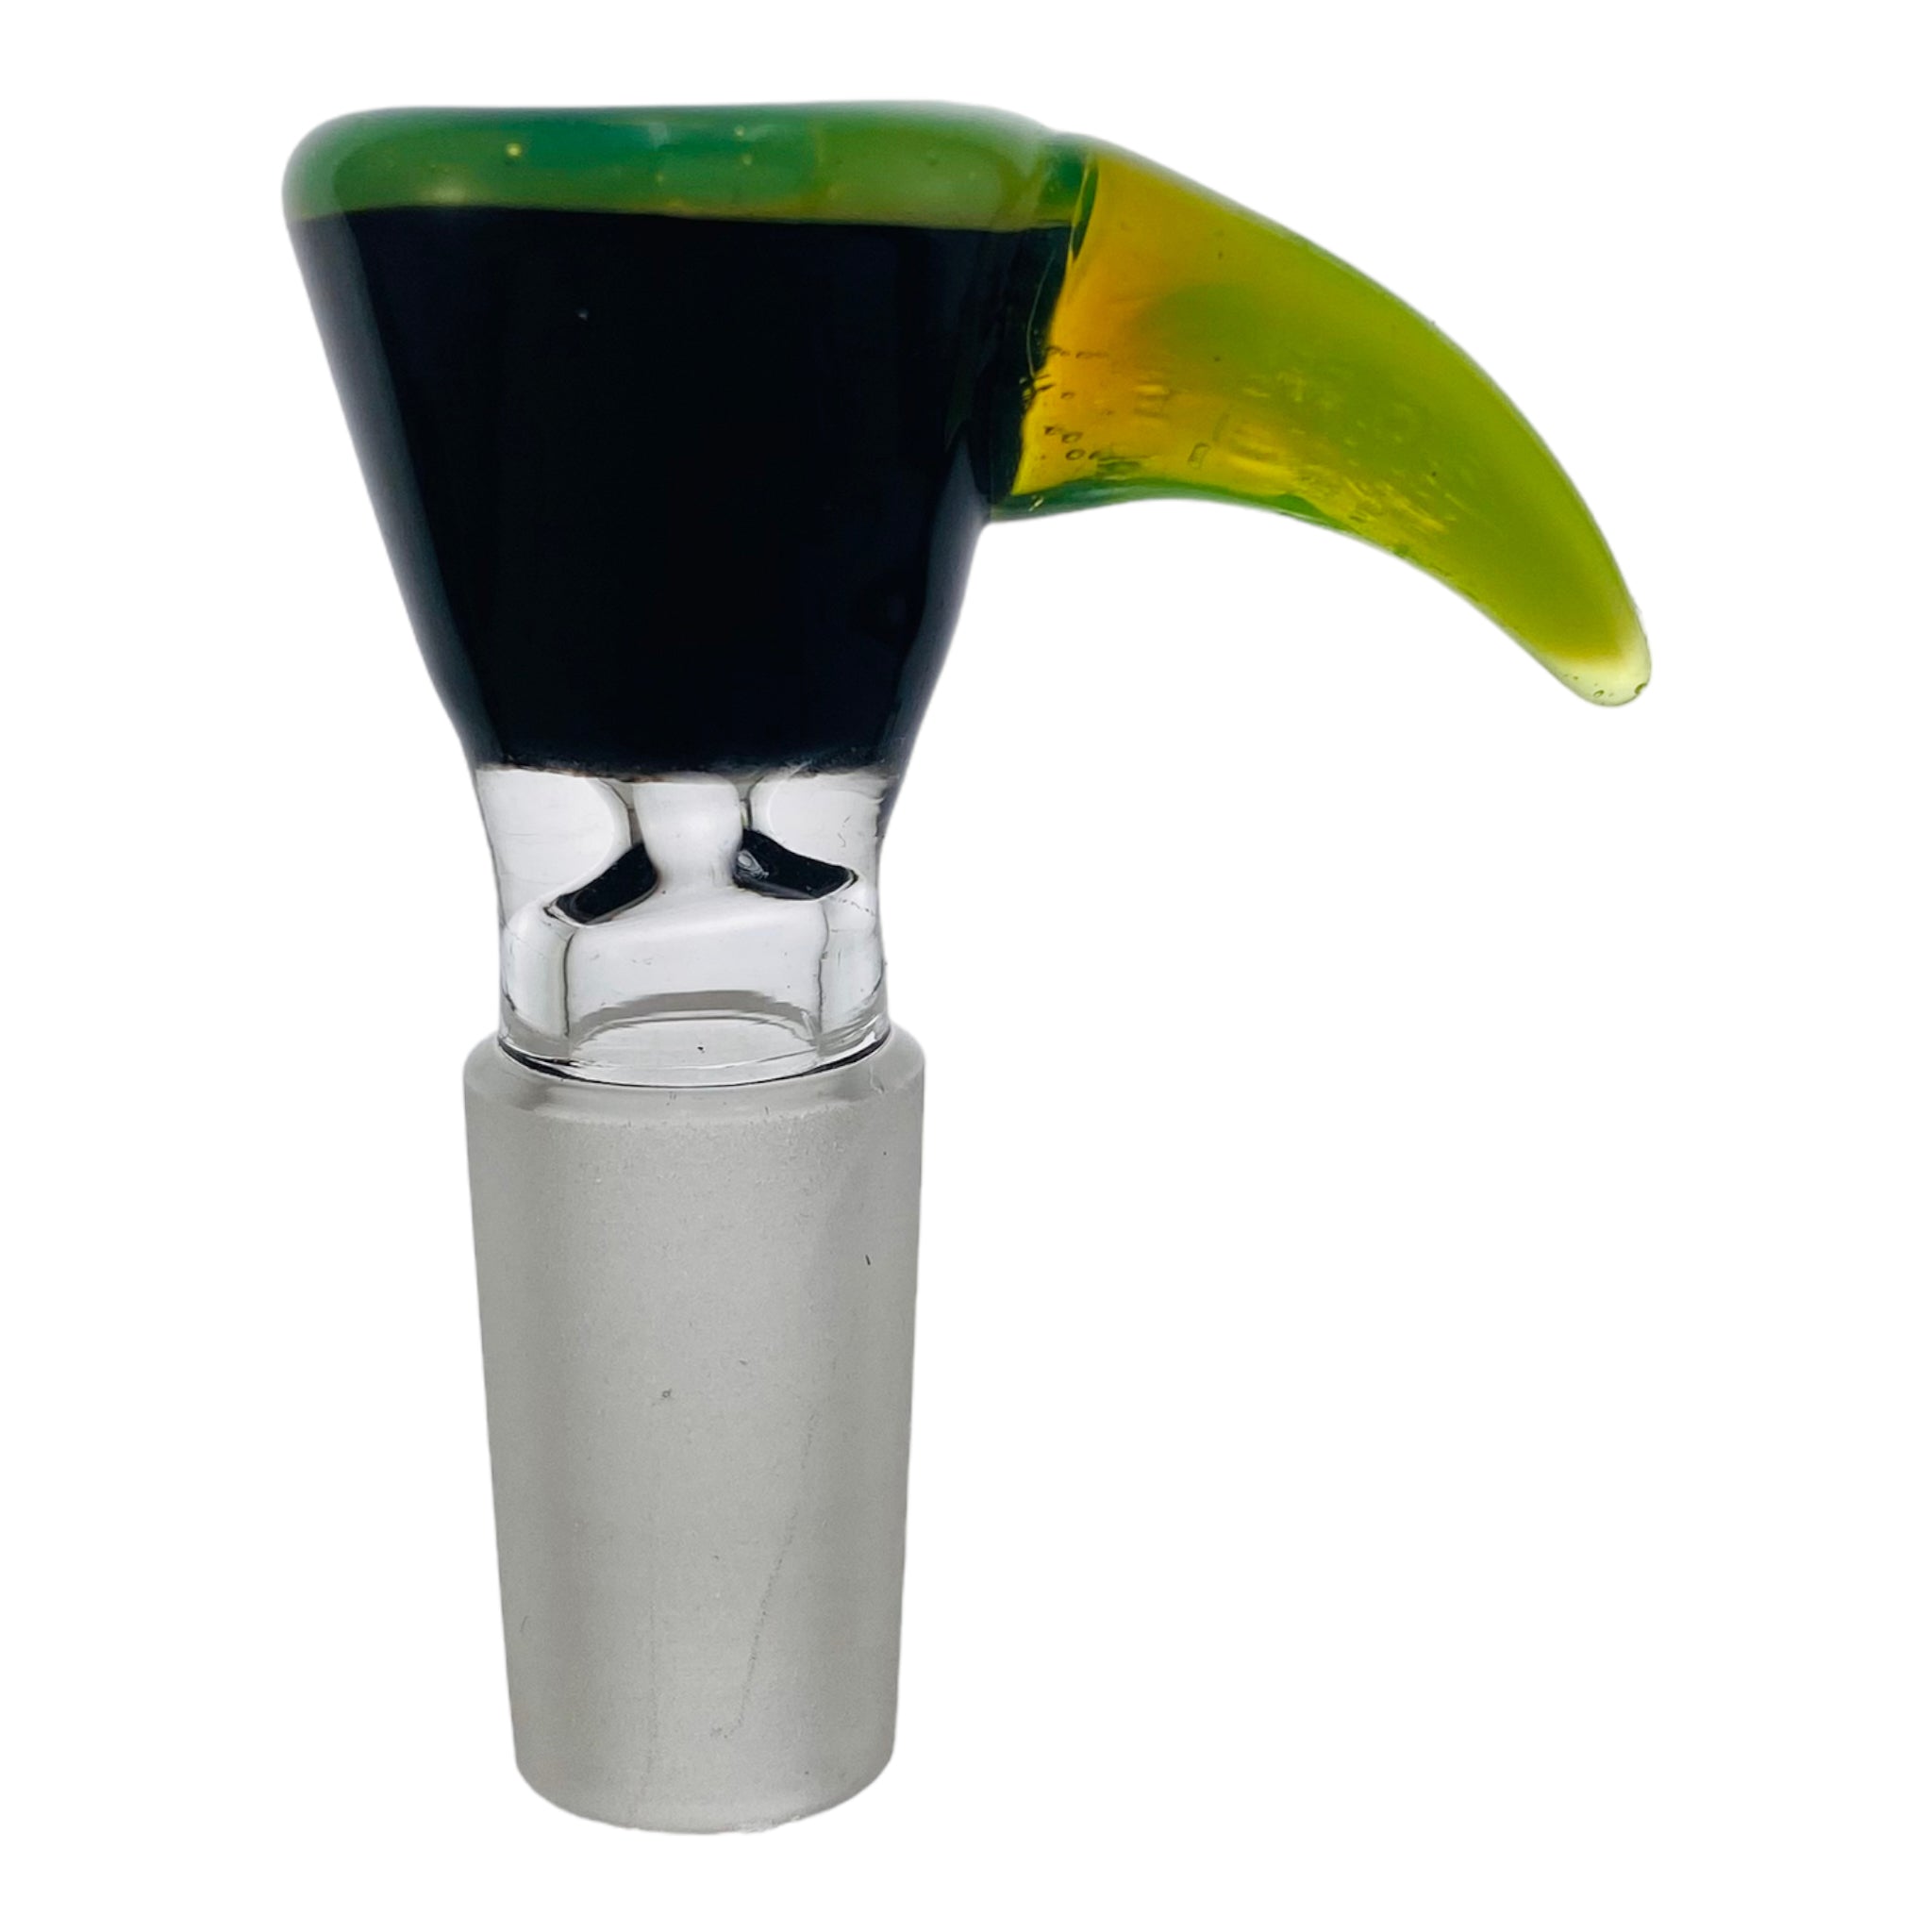 14mm Flower Bowl - Black Funnel With Green Handle Bong Bowl Piece